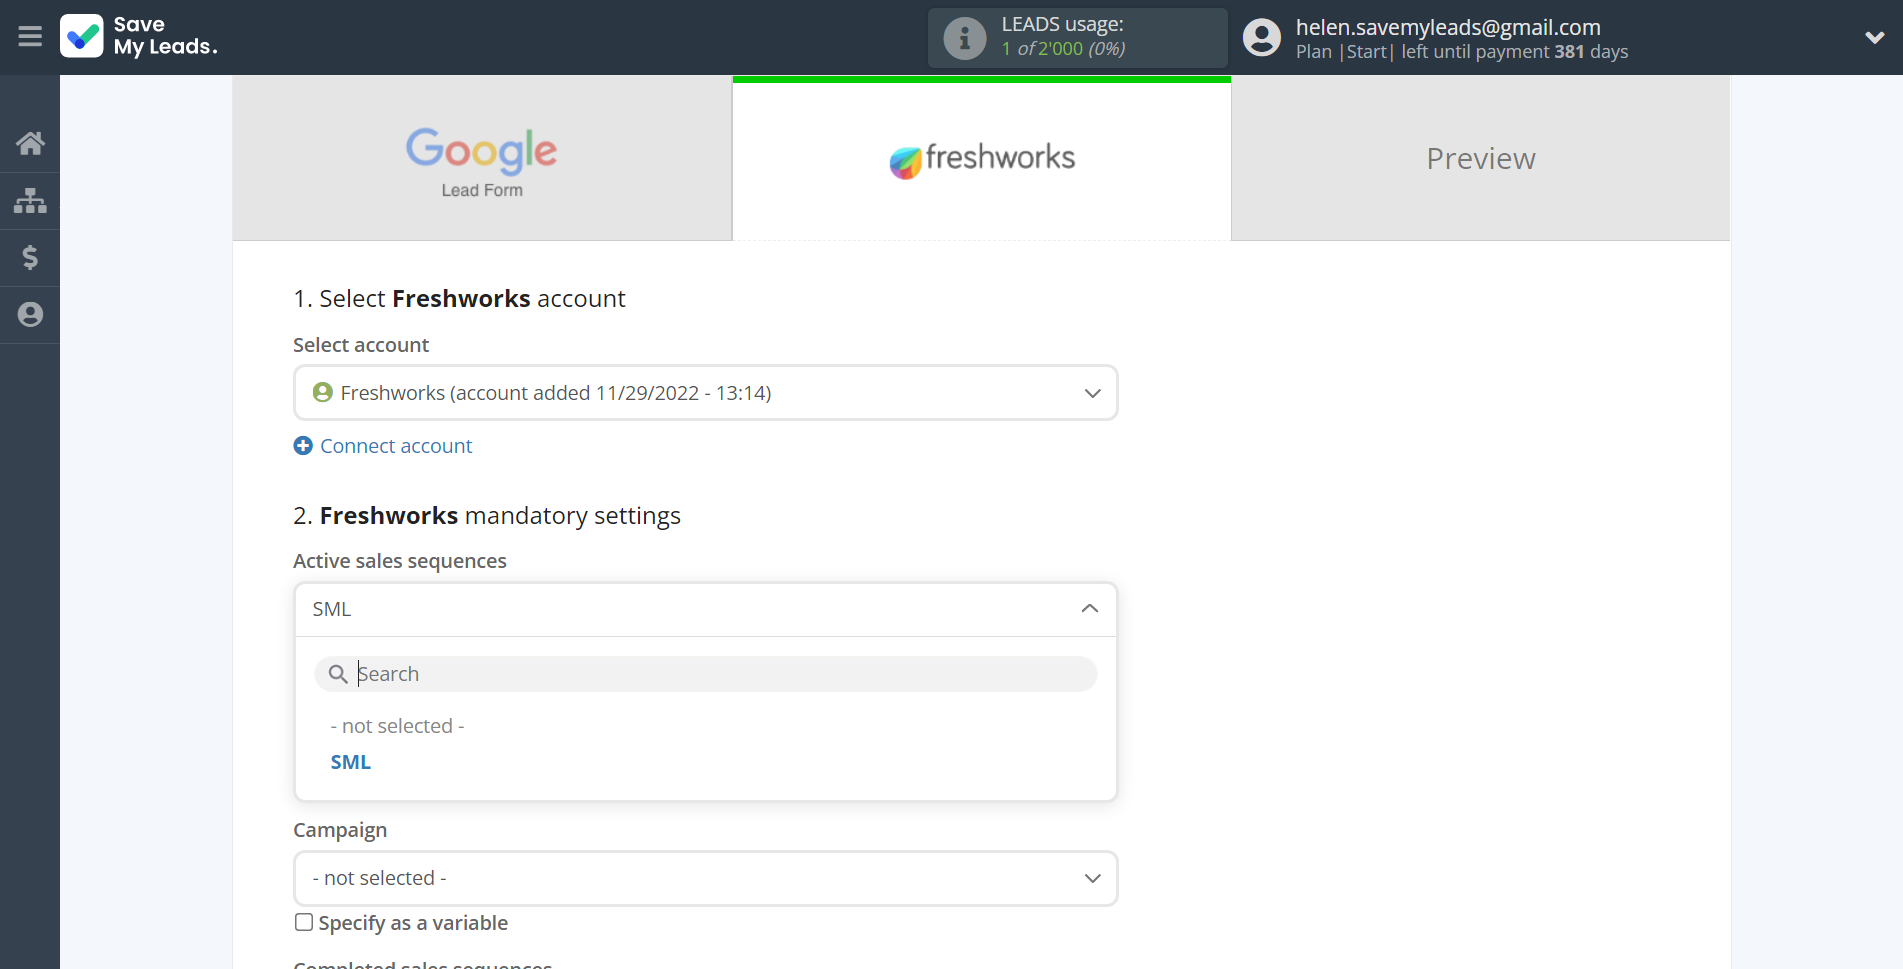 How to Connect Google Lead Form with Freshworks Create Deal | Assigning fields